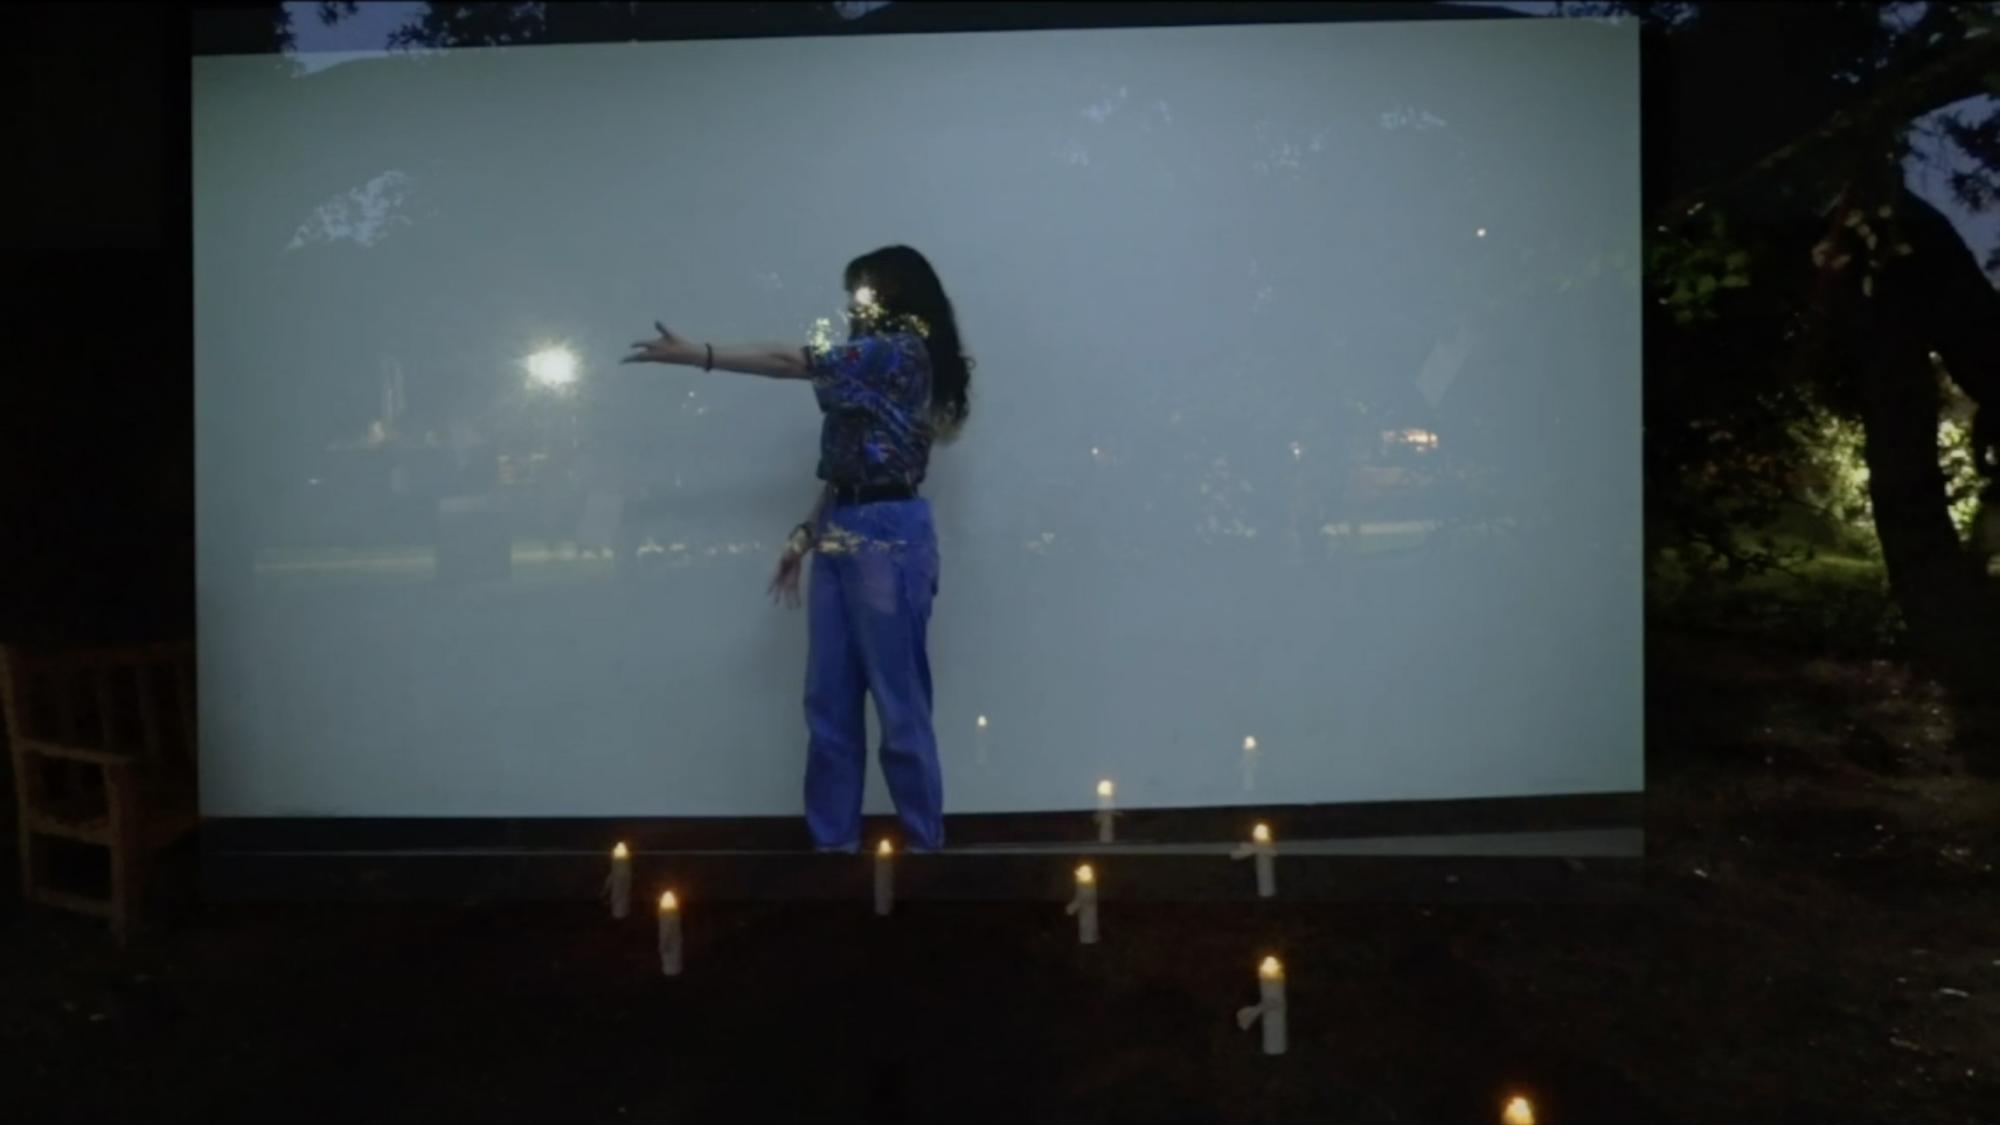 ensemble member reaches their hand out, standing in front of a white screen with an image of trees and candles layered over